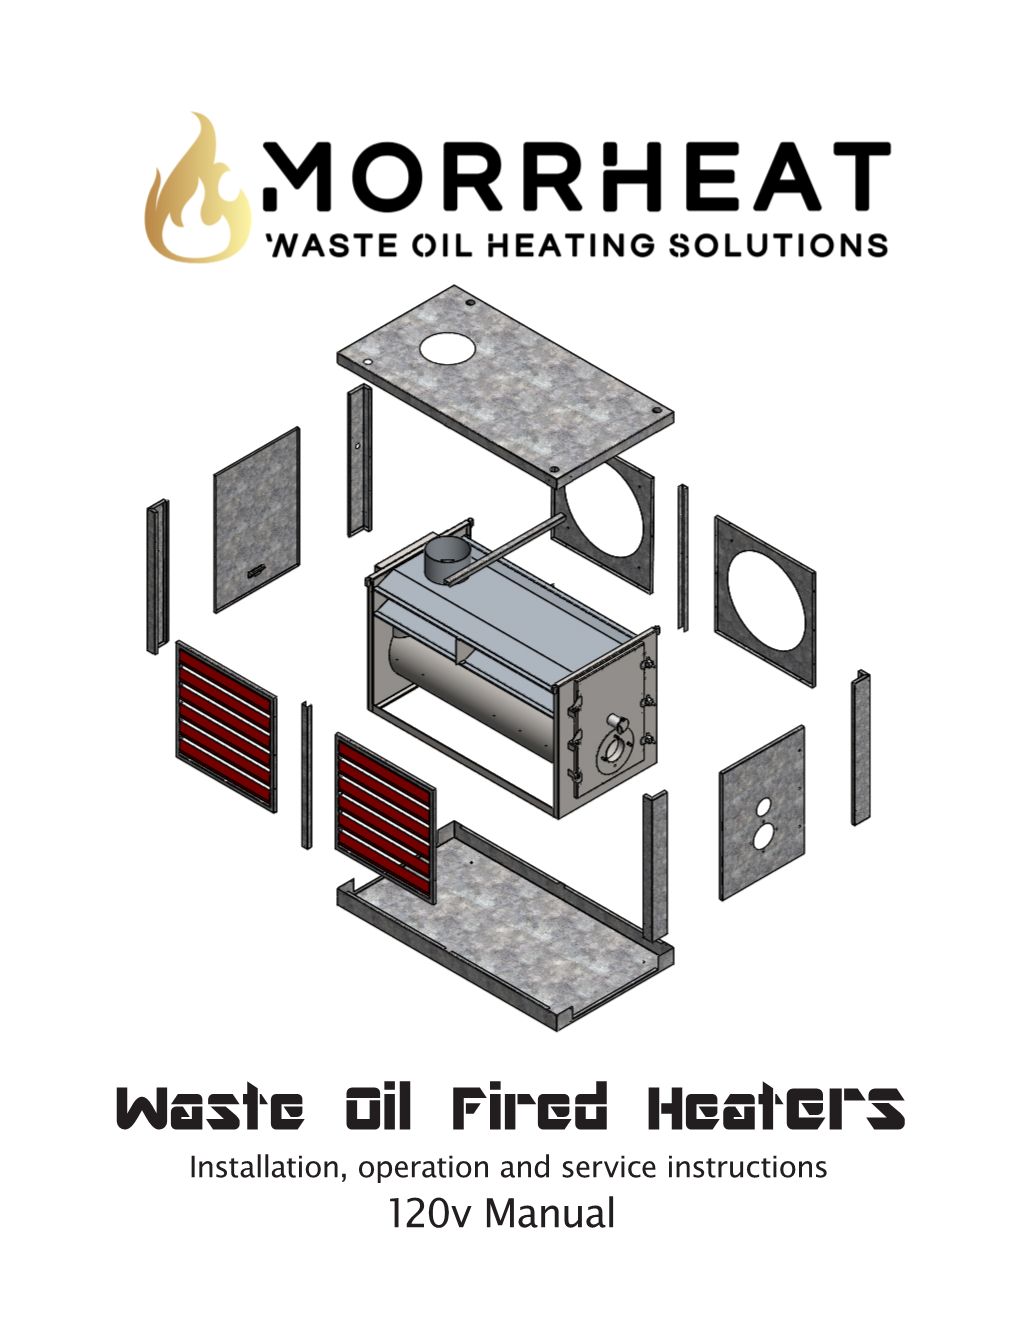 Waste Oil Fired Heaters Installation, Operation and Service Instructions 120V Manual Table of Contents